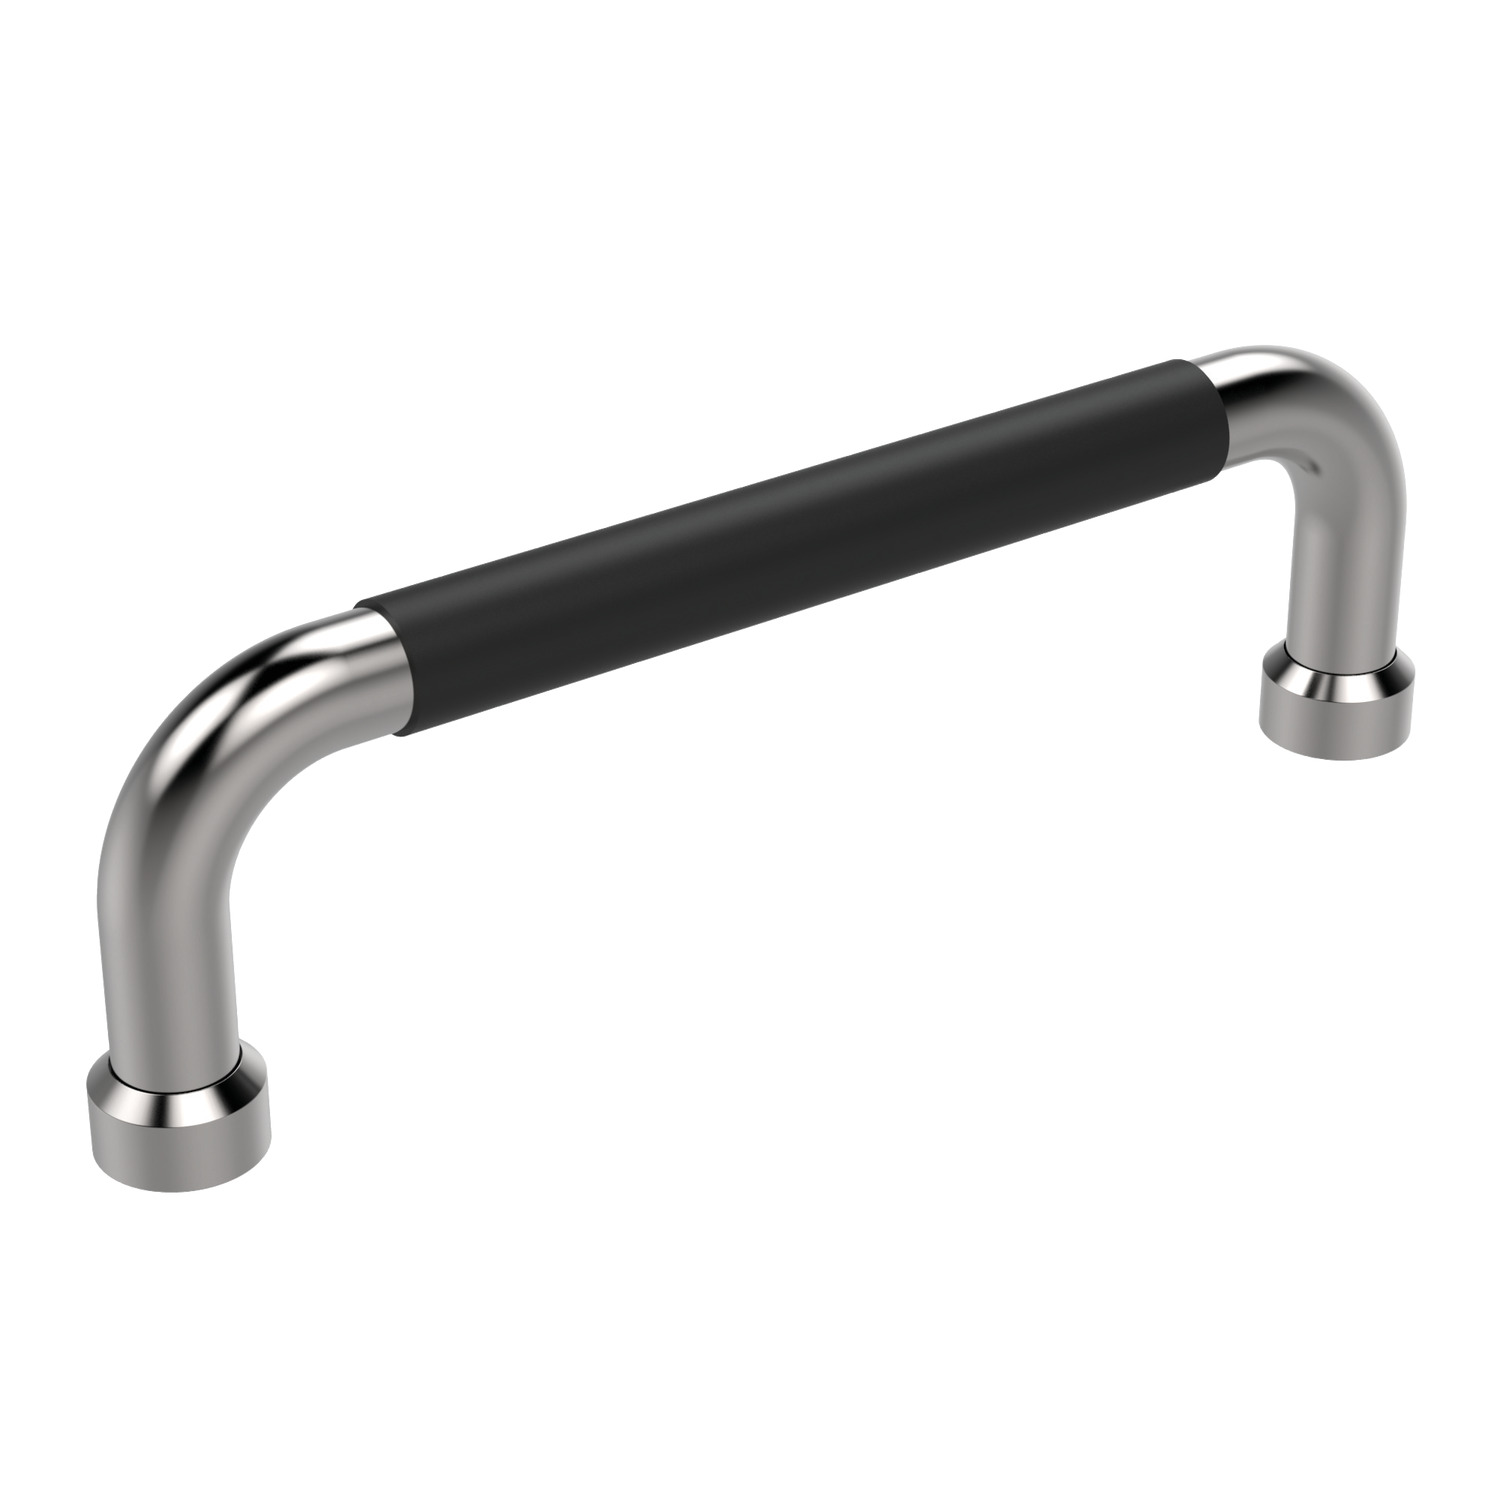 78740.W0005 Pull Handles with Plastic Cover - Steel. 55